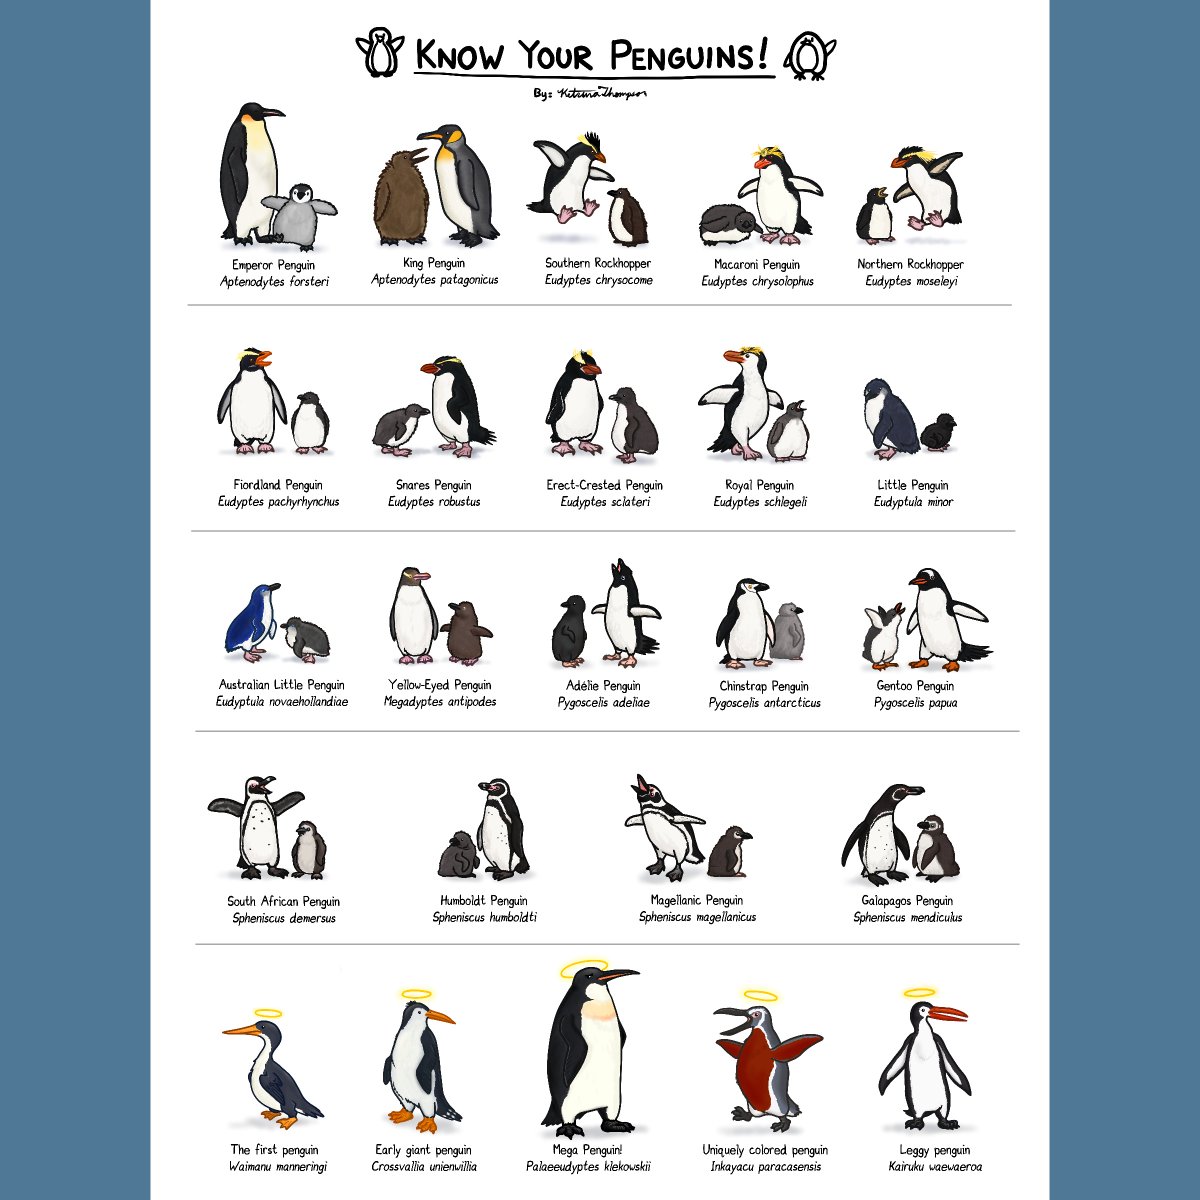 I hope you enjoyed March of the Penguins! It's a bit of a departure from the usual style, but learning about how to digitally paint bird plumage was enjoyable. It's available as a print on my Redbubble shop!
#marchofthepenguins #penguin #bird #illustratedguide #education #art